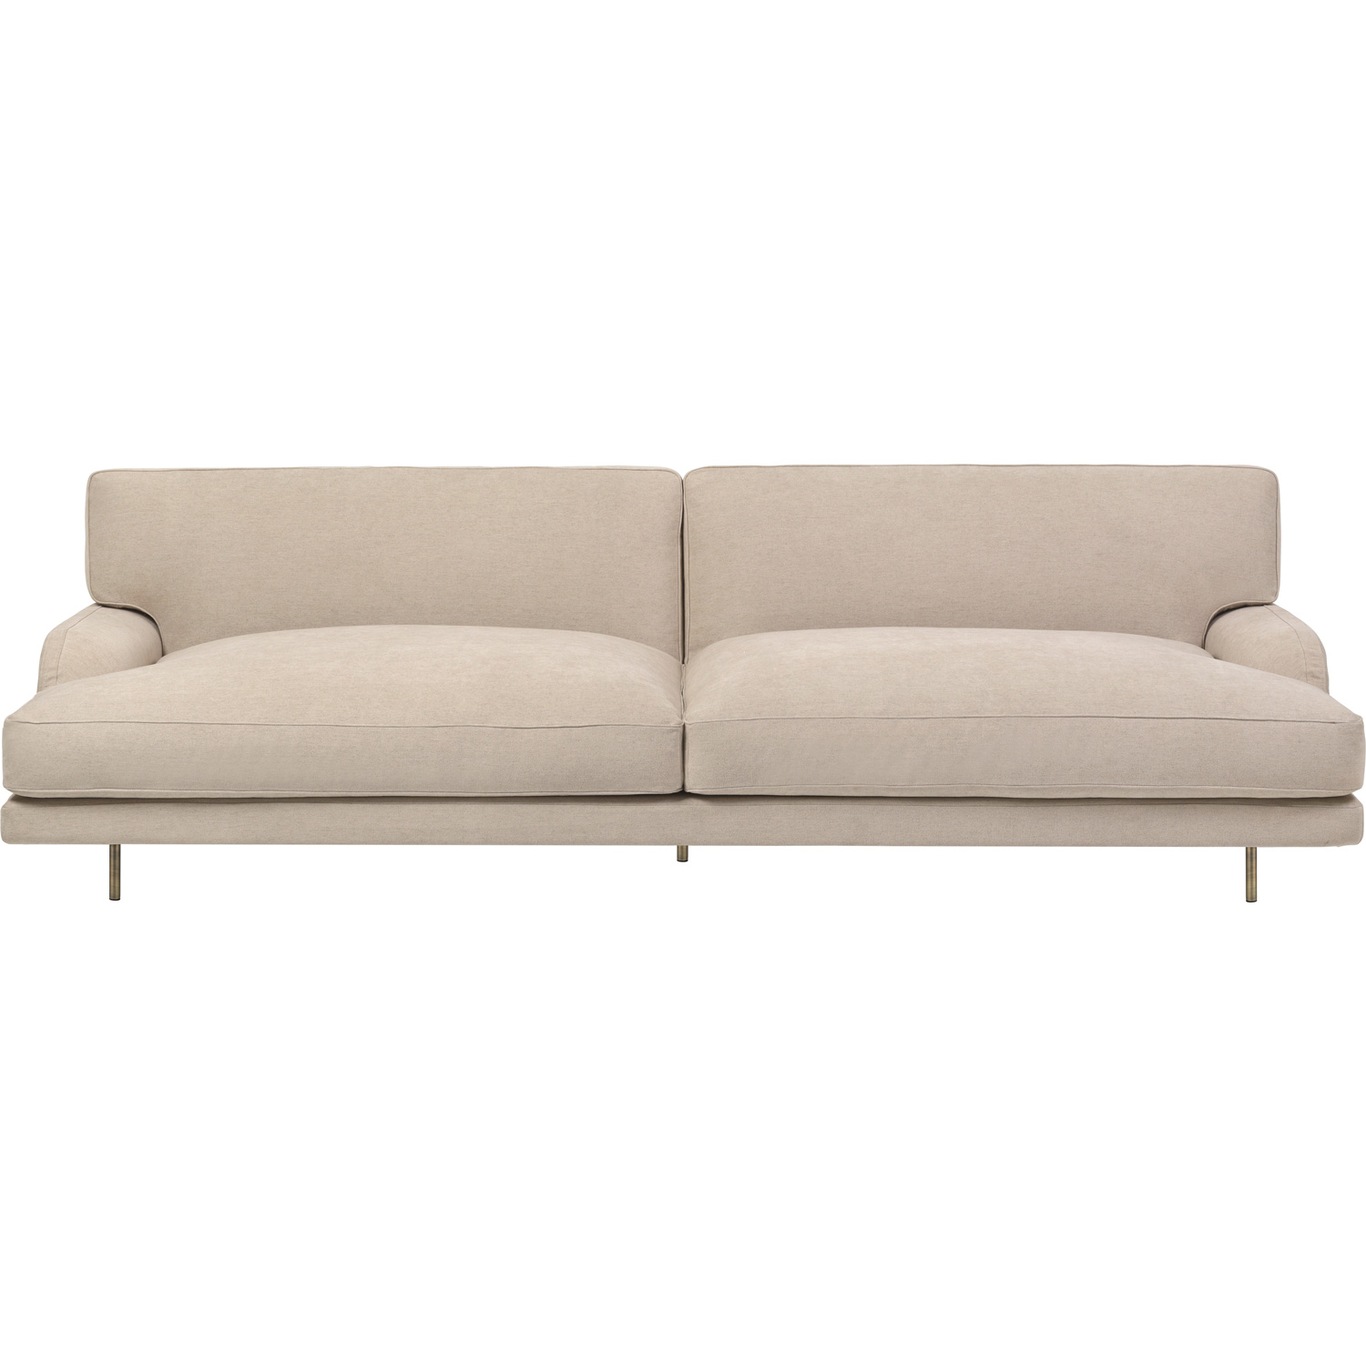 Flaneur Sofa FC 2,5-Pers, Ben Messing / Hot Madison 073 Beige